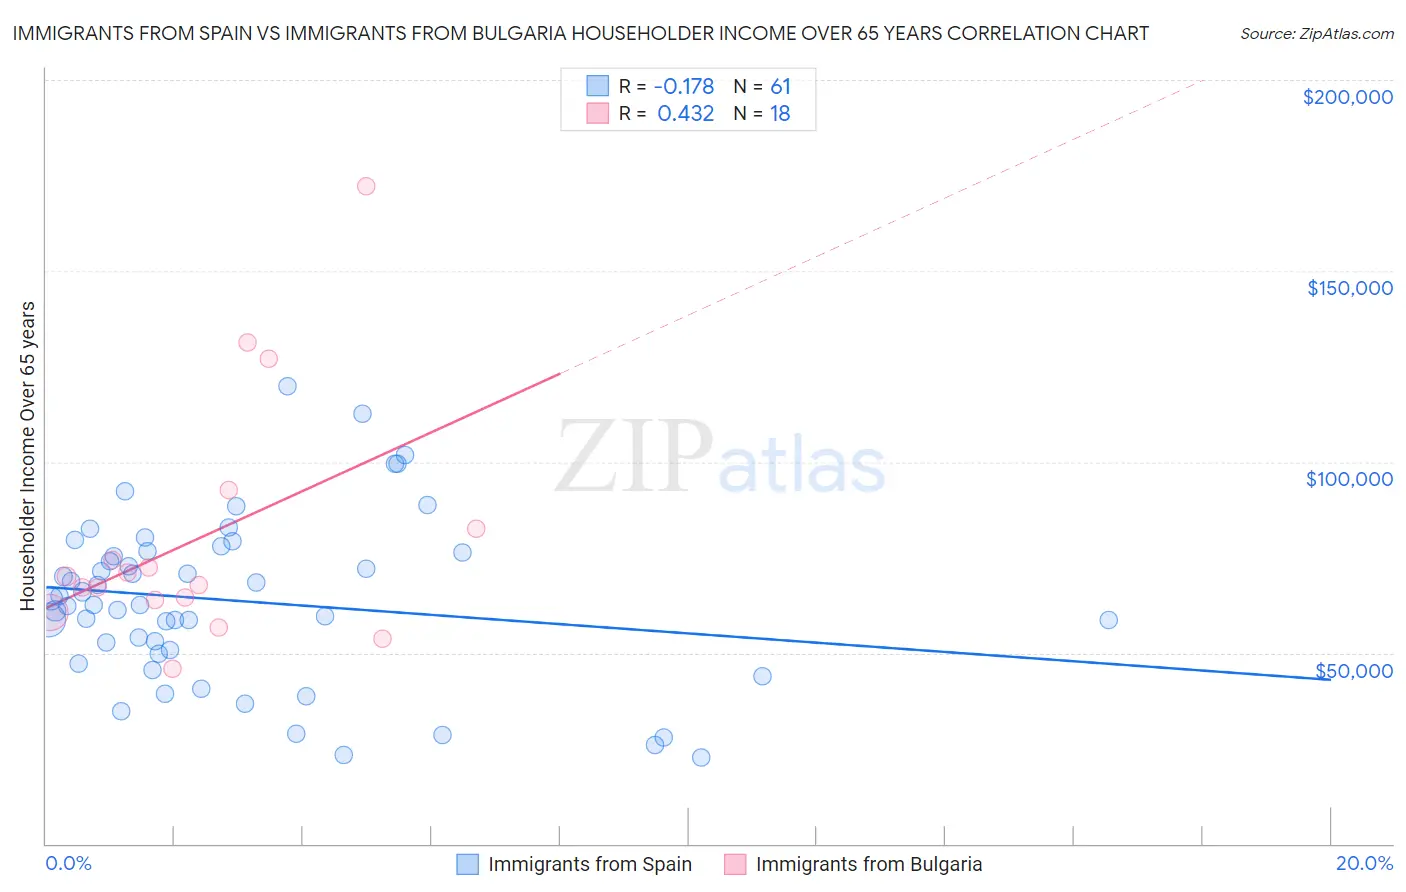 Immigrants from Spain vs Immigrants from Bulgaria Householder Income Over 65 years